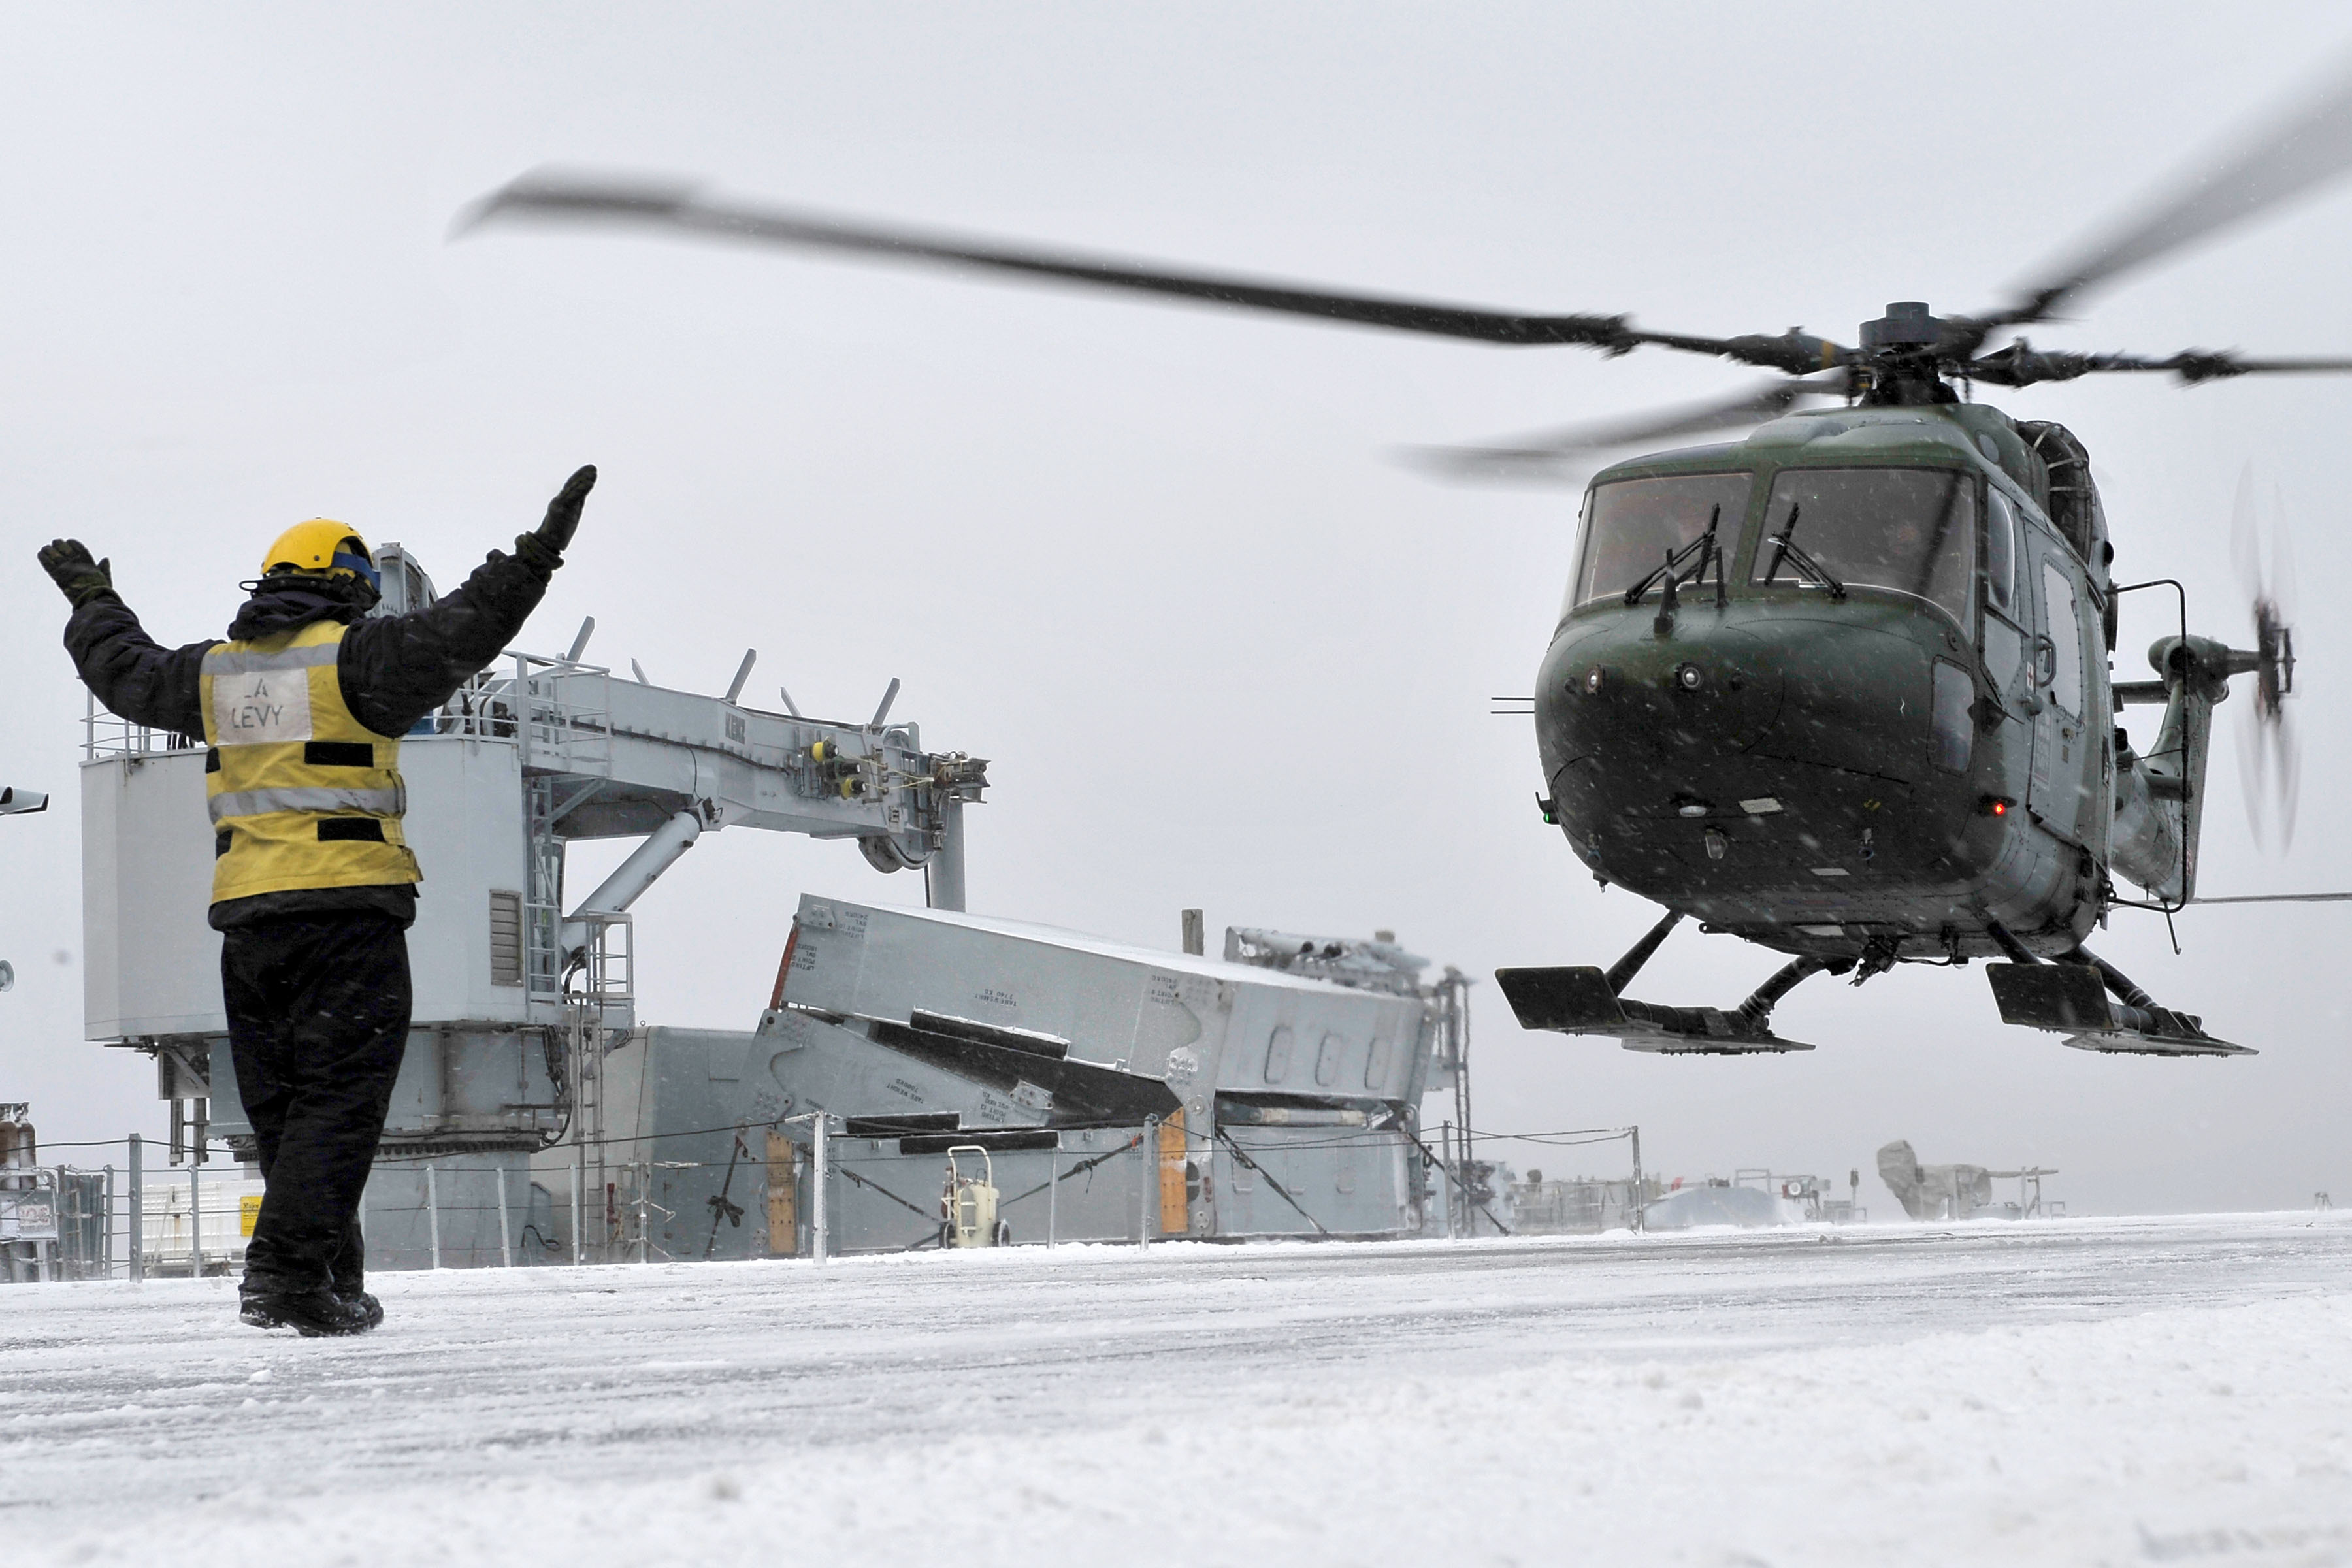 Lynx_Helicopter_Lands_on_HMS_Ocean_During_Ex_Cold_Response_in_Norway_MOD_45151155.jpg